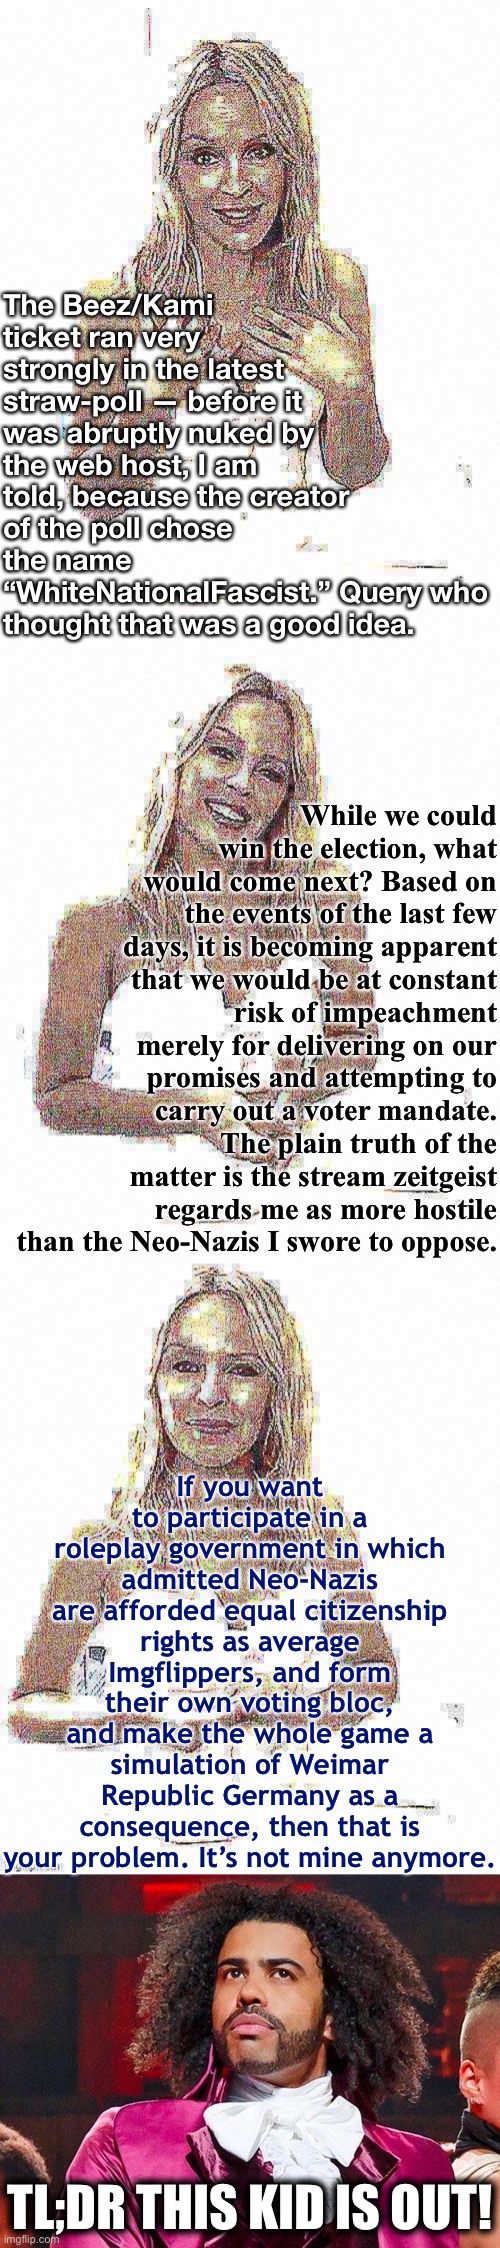 Tl;dr I am fleeing the stream because of political persecution, though I hope our candidacy inspires change going forward. | The Beez/Kami ticket ran very strongly in the latest straw-poll — before it was abruptly nuked by the web host, I am told, because the creator of the poll chose the name “WhiteNationalFascist.” Query who thought that was a good idea. While we could win the election, what would come next? Based on the events of the last few days, it is becoming apparent that we would be at constant risk of impeachment merely for delivering on our promises and attempting to carry out a voter mandate. The plain truth of the matter is the stream zeitgeist regards me as more hostile than the Neo-Nazis I swore to oppose. If you want to participate in a roleplay government in which admitted Neo-Nazis are afforded equal citizenship rights as average Imgflippers, and form their own voting bloc, and make the whole game a simulation of Weimar Republic Germany as a consequence, then that is your problem. It’s not mine anymore. TL;DR THIS KID IS OUT! | image tagged in bad pun kylie minogue deep-fried 3,daveed diggs,impeachment,impeach,neo-nazis,nazis | made w/ Imgflip meme maker